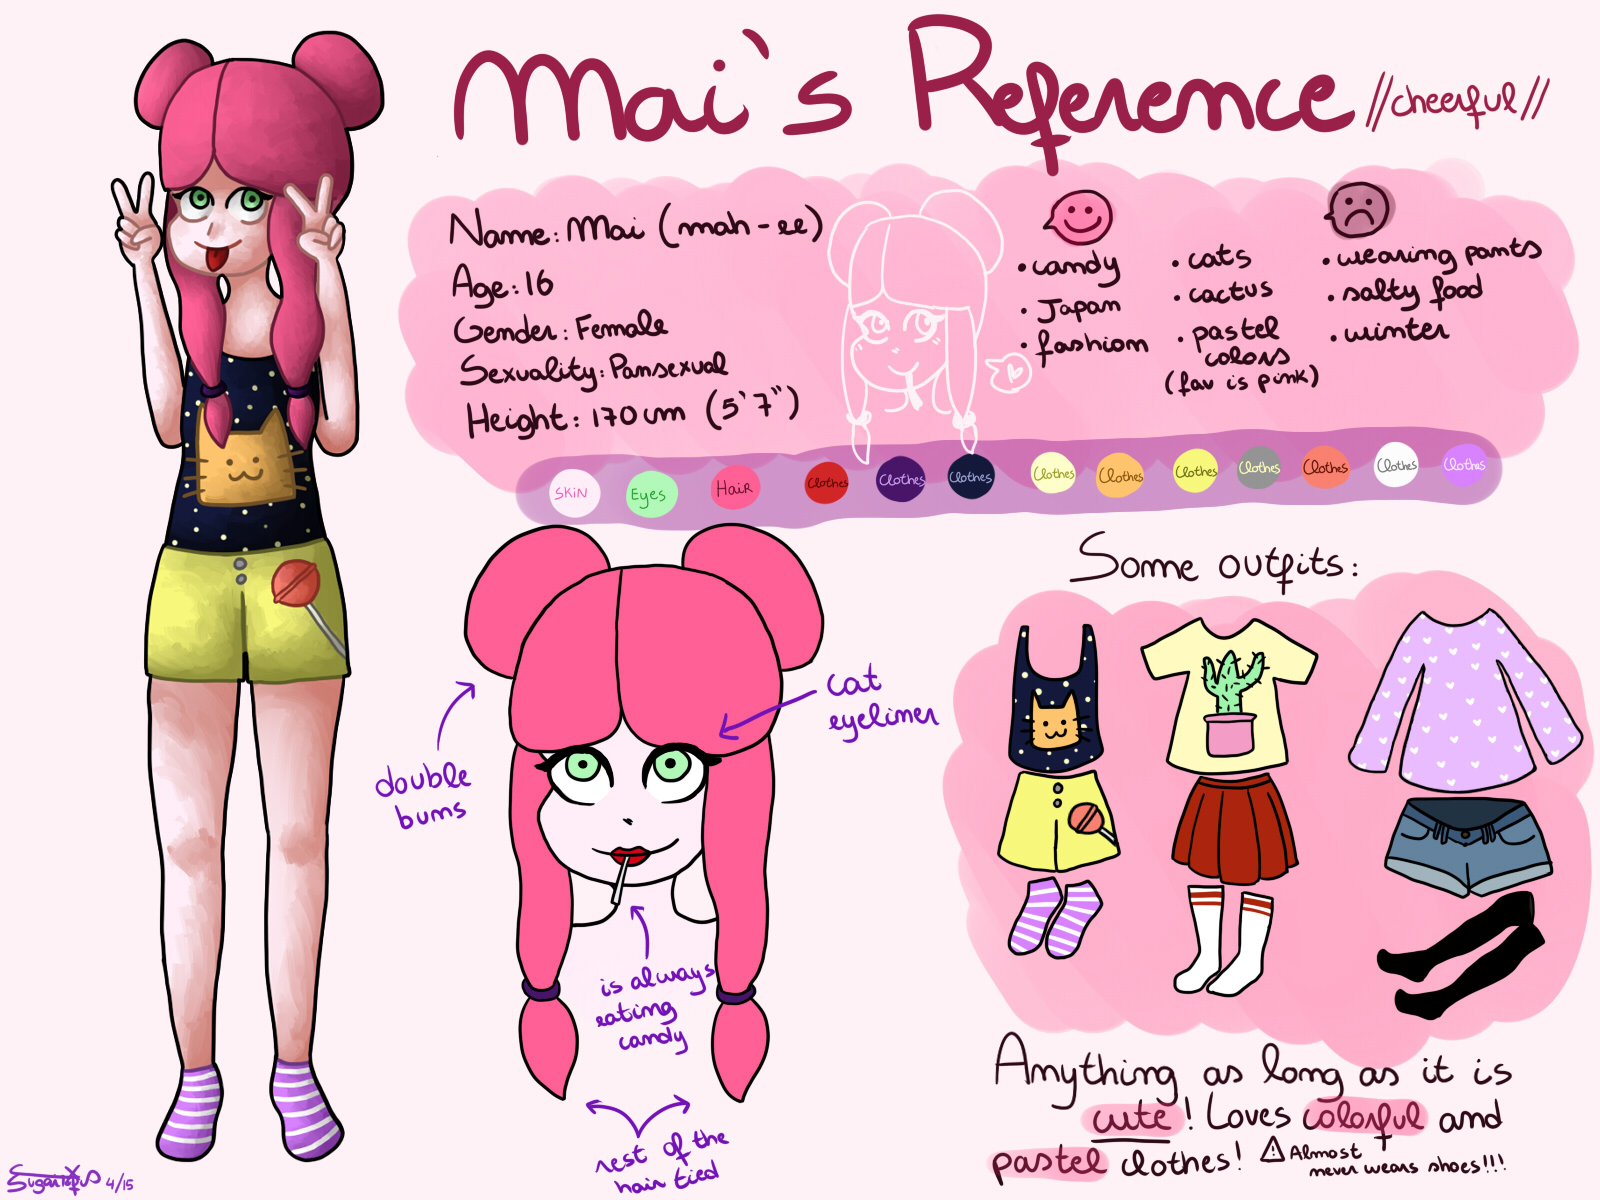 040 Mai's Reference